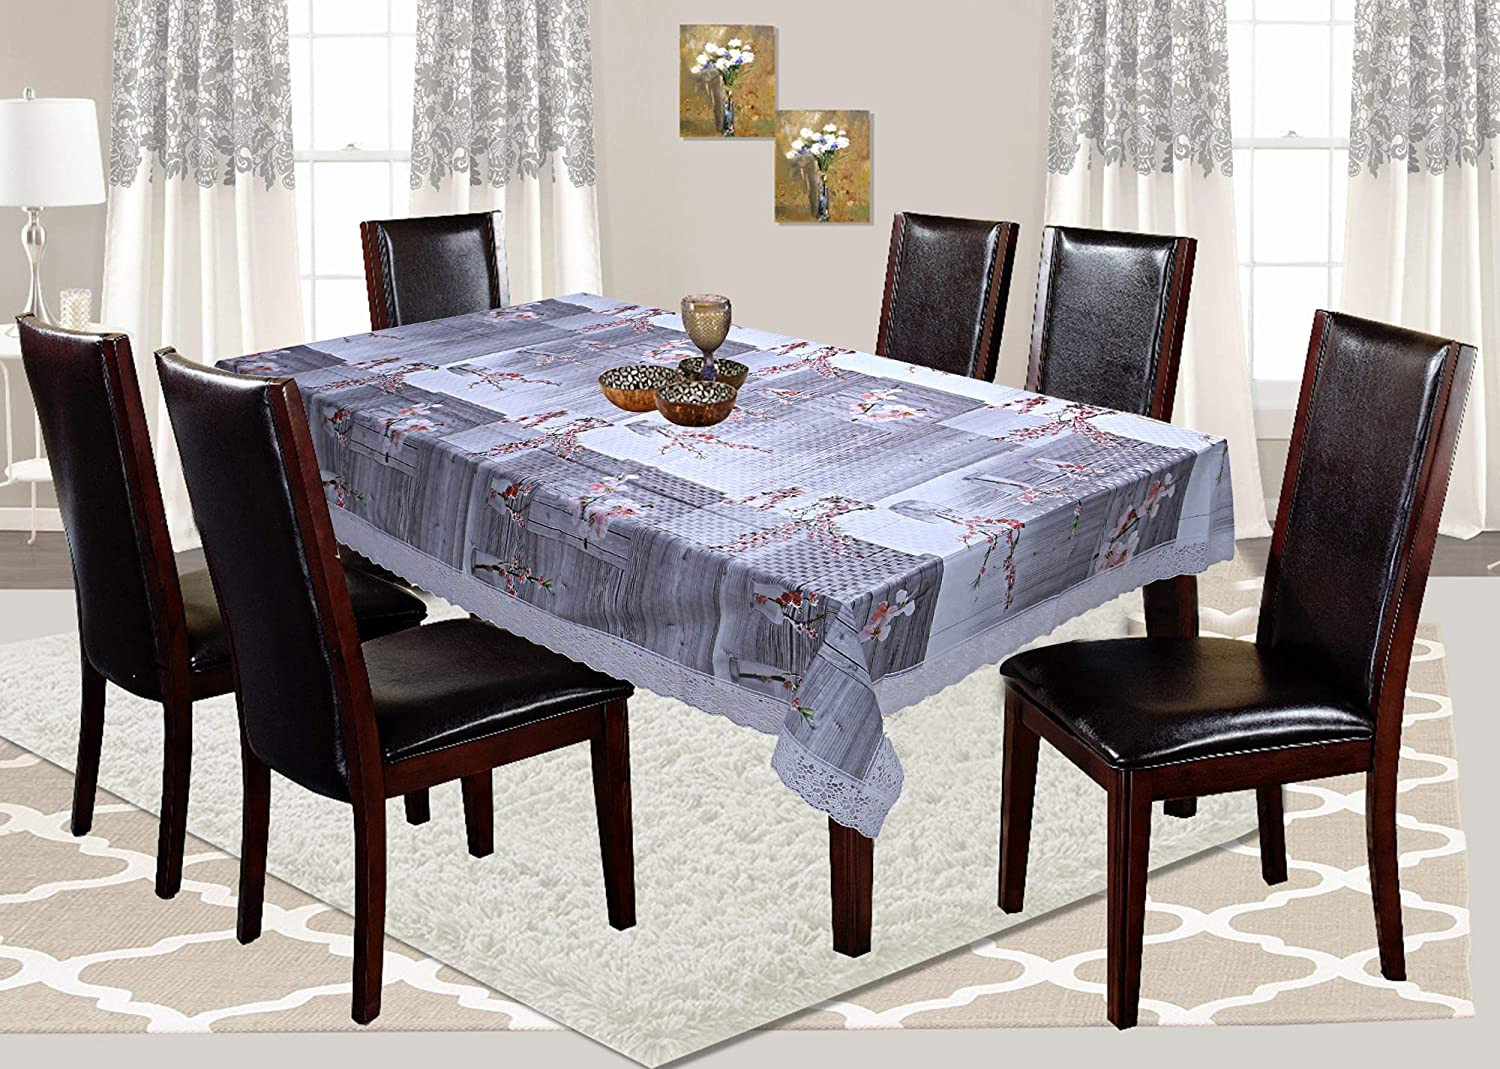 Kuber Industries Floral Design PVC 6 Seater Dining Table Cover 60